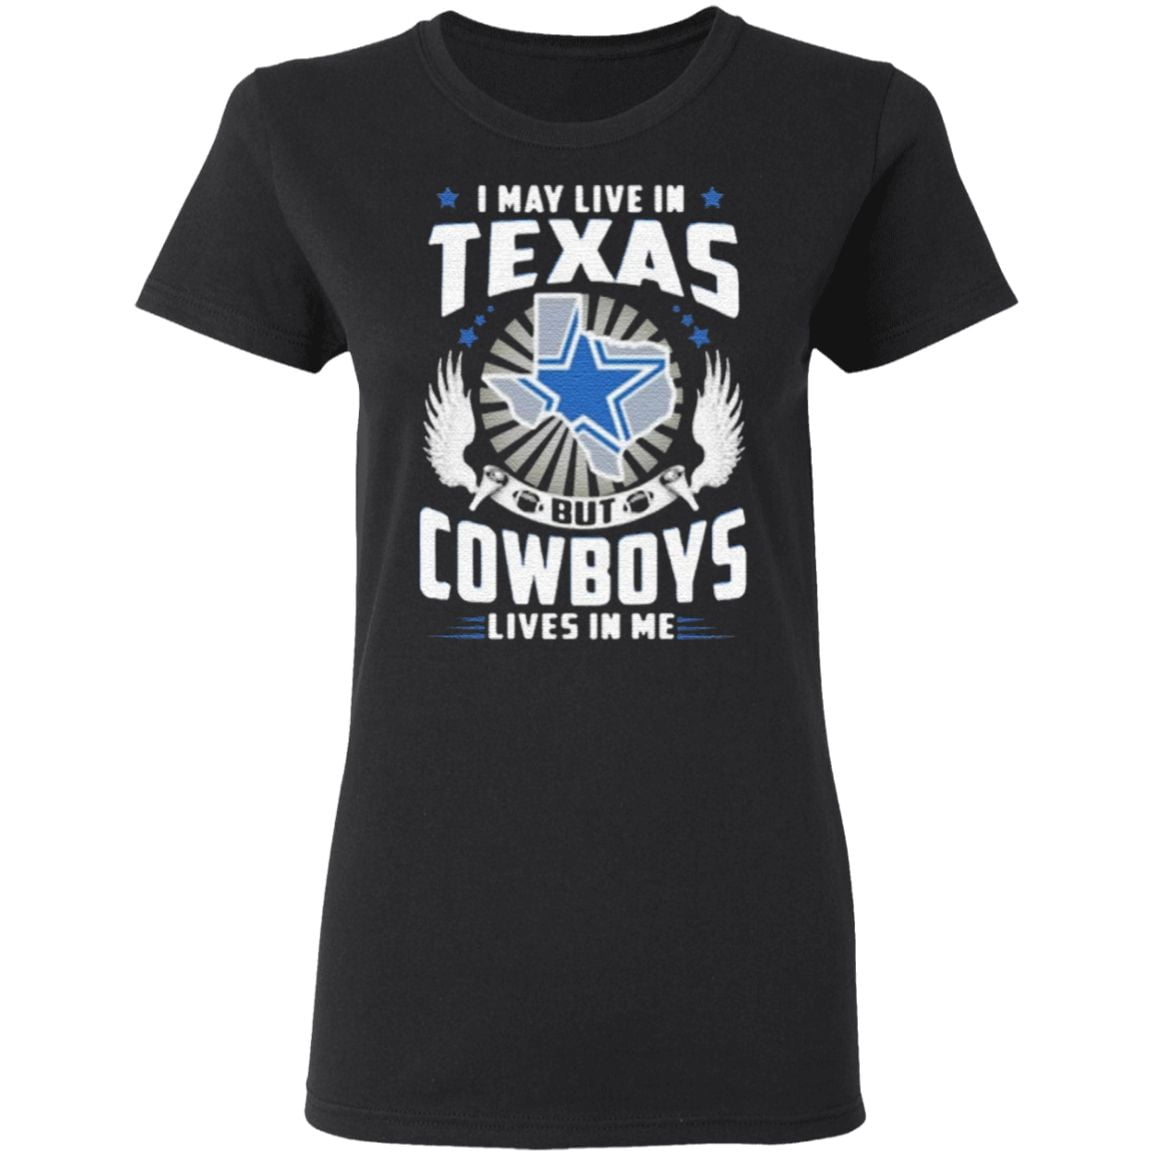 I May Live In Texas But CowboysTide Lives In Me T Shirt